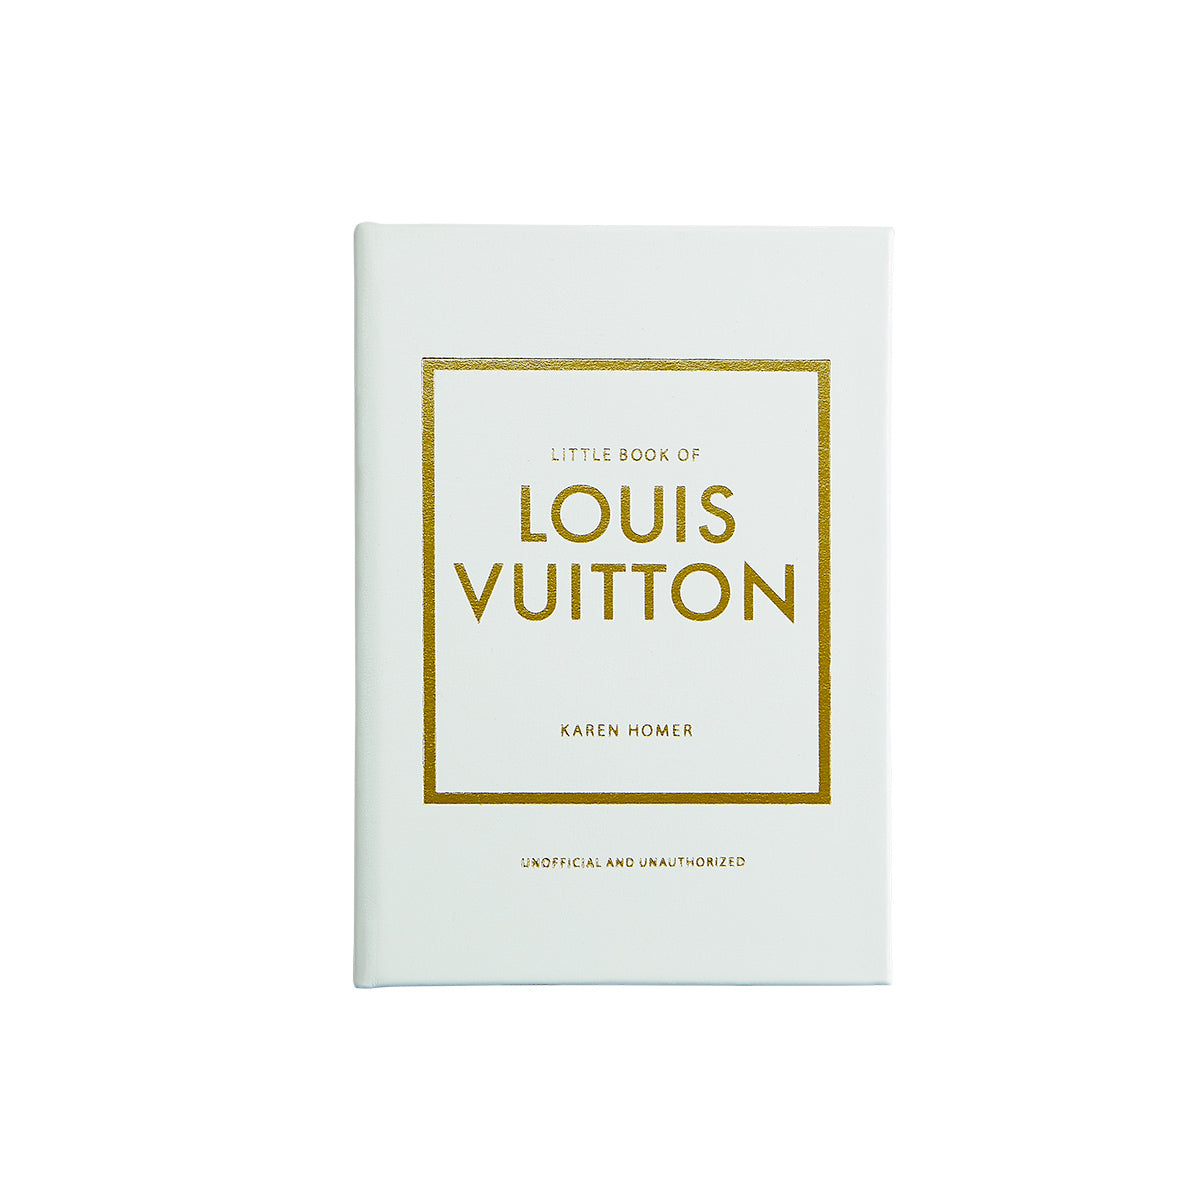 Little Book of Louis Vuitton  Ivory Traditional Leather – Graphic Image